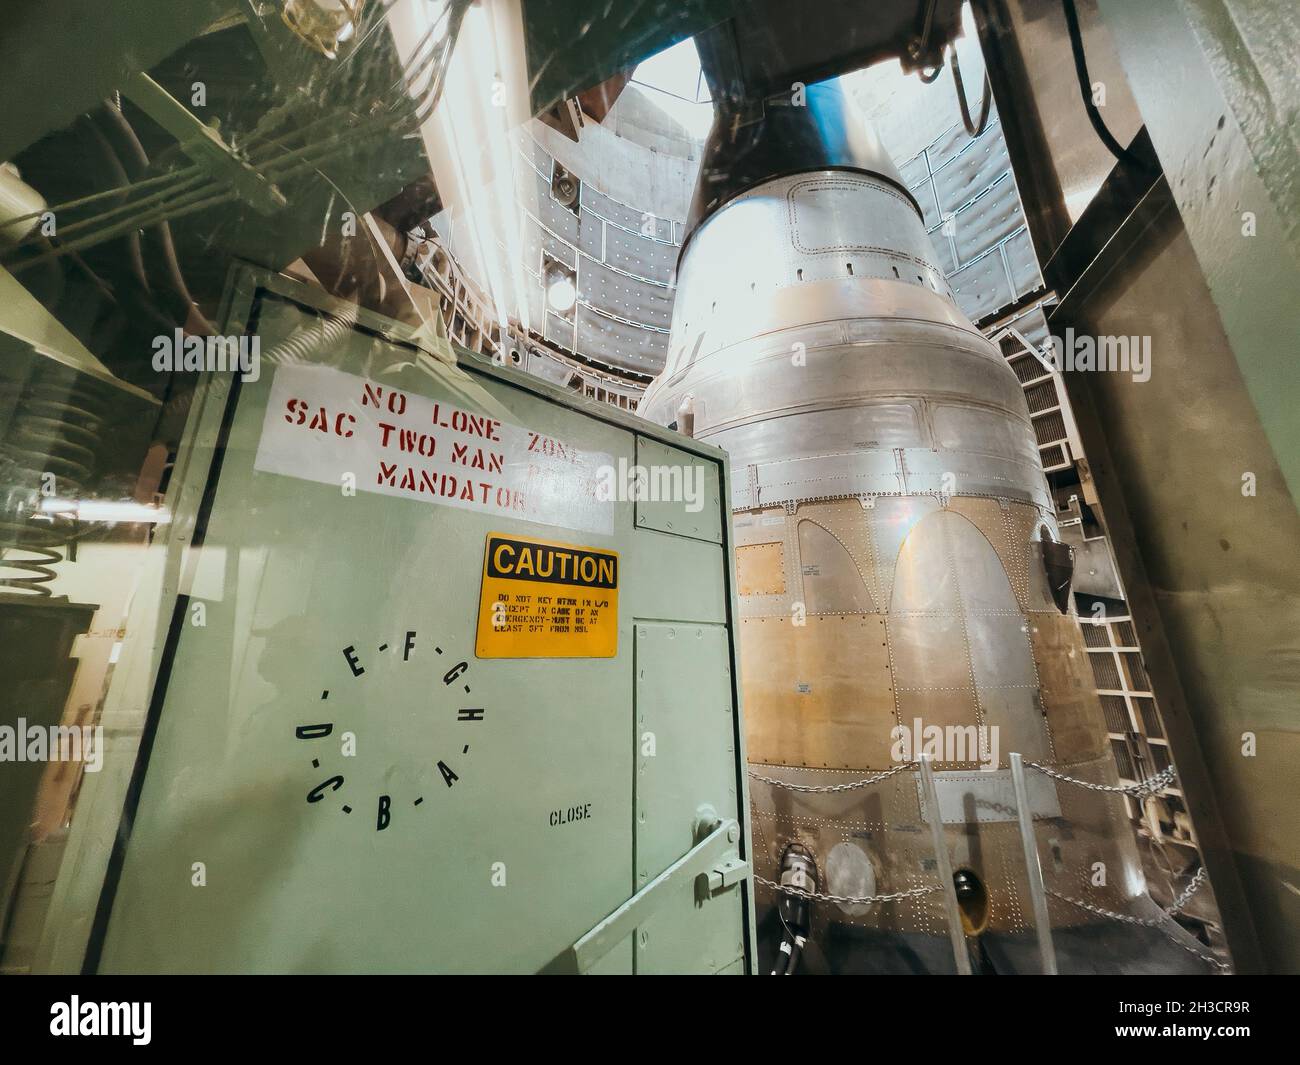 A heavy metal door at the top of the Titan missile silo sits ajar, allowing visitors to see the missile warhead Stock Photo